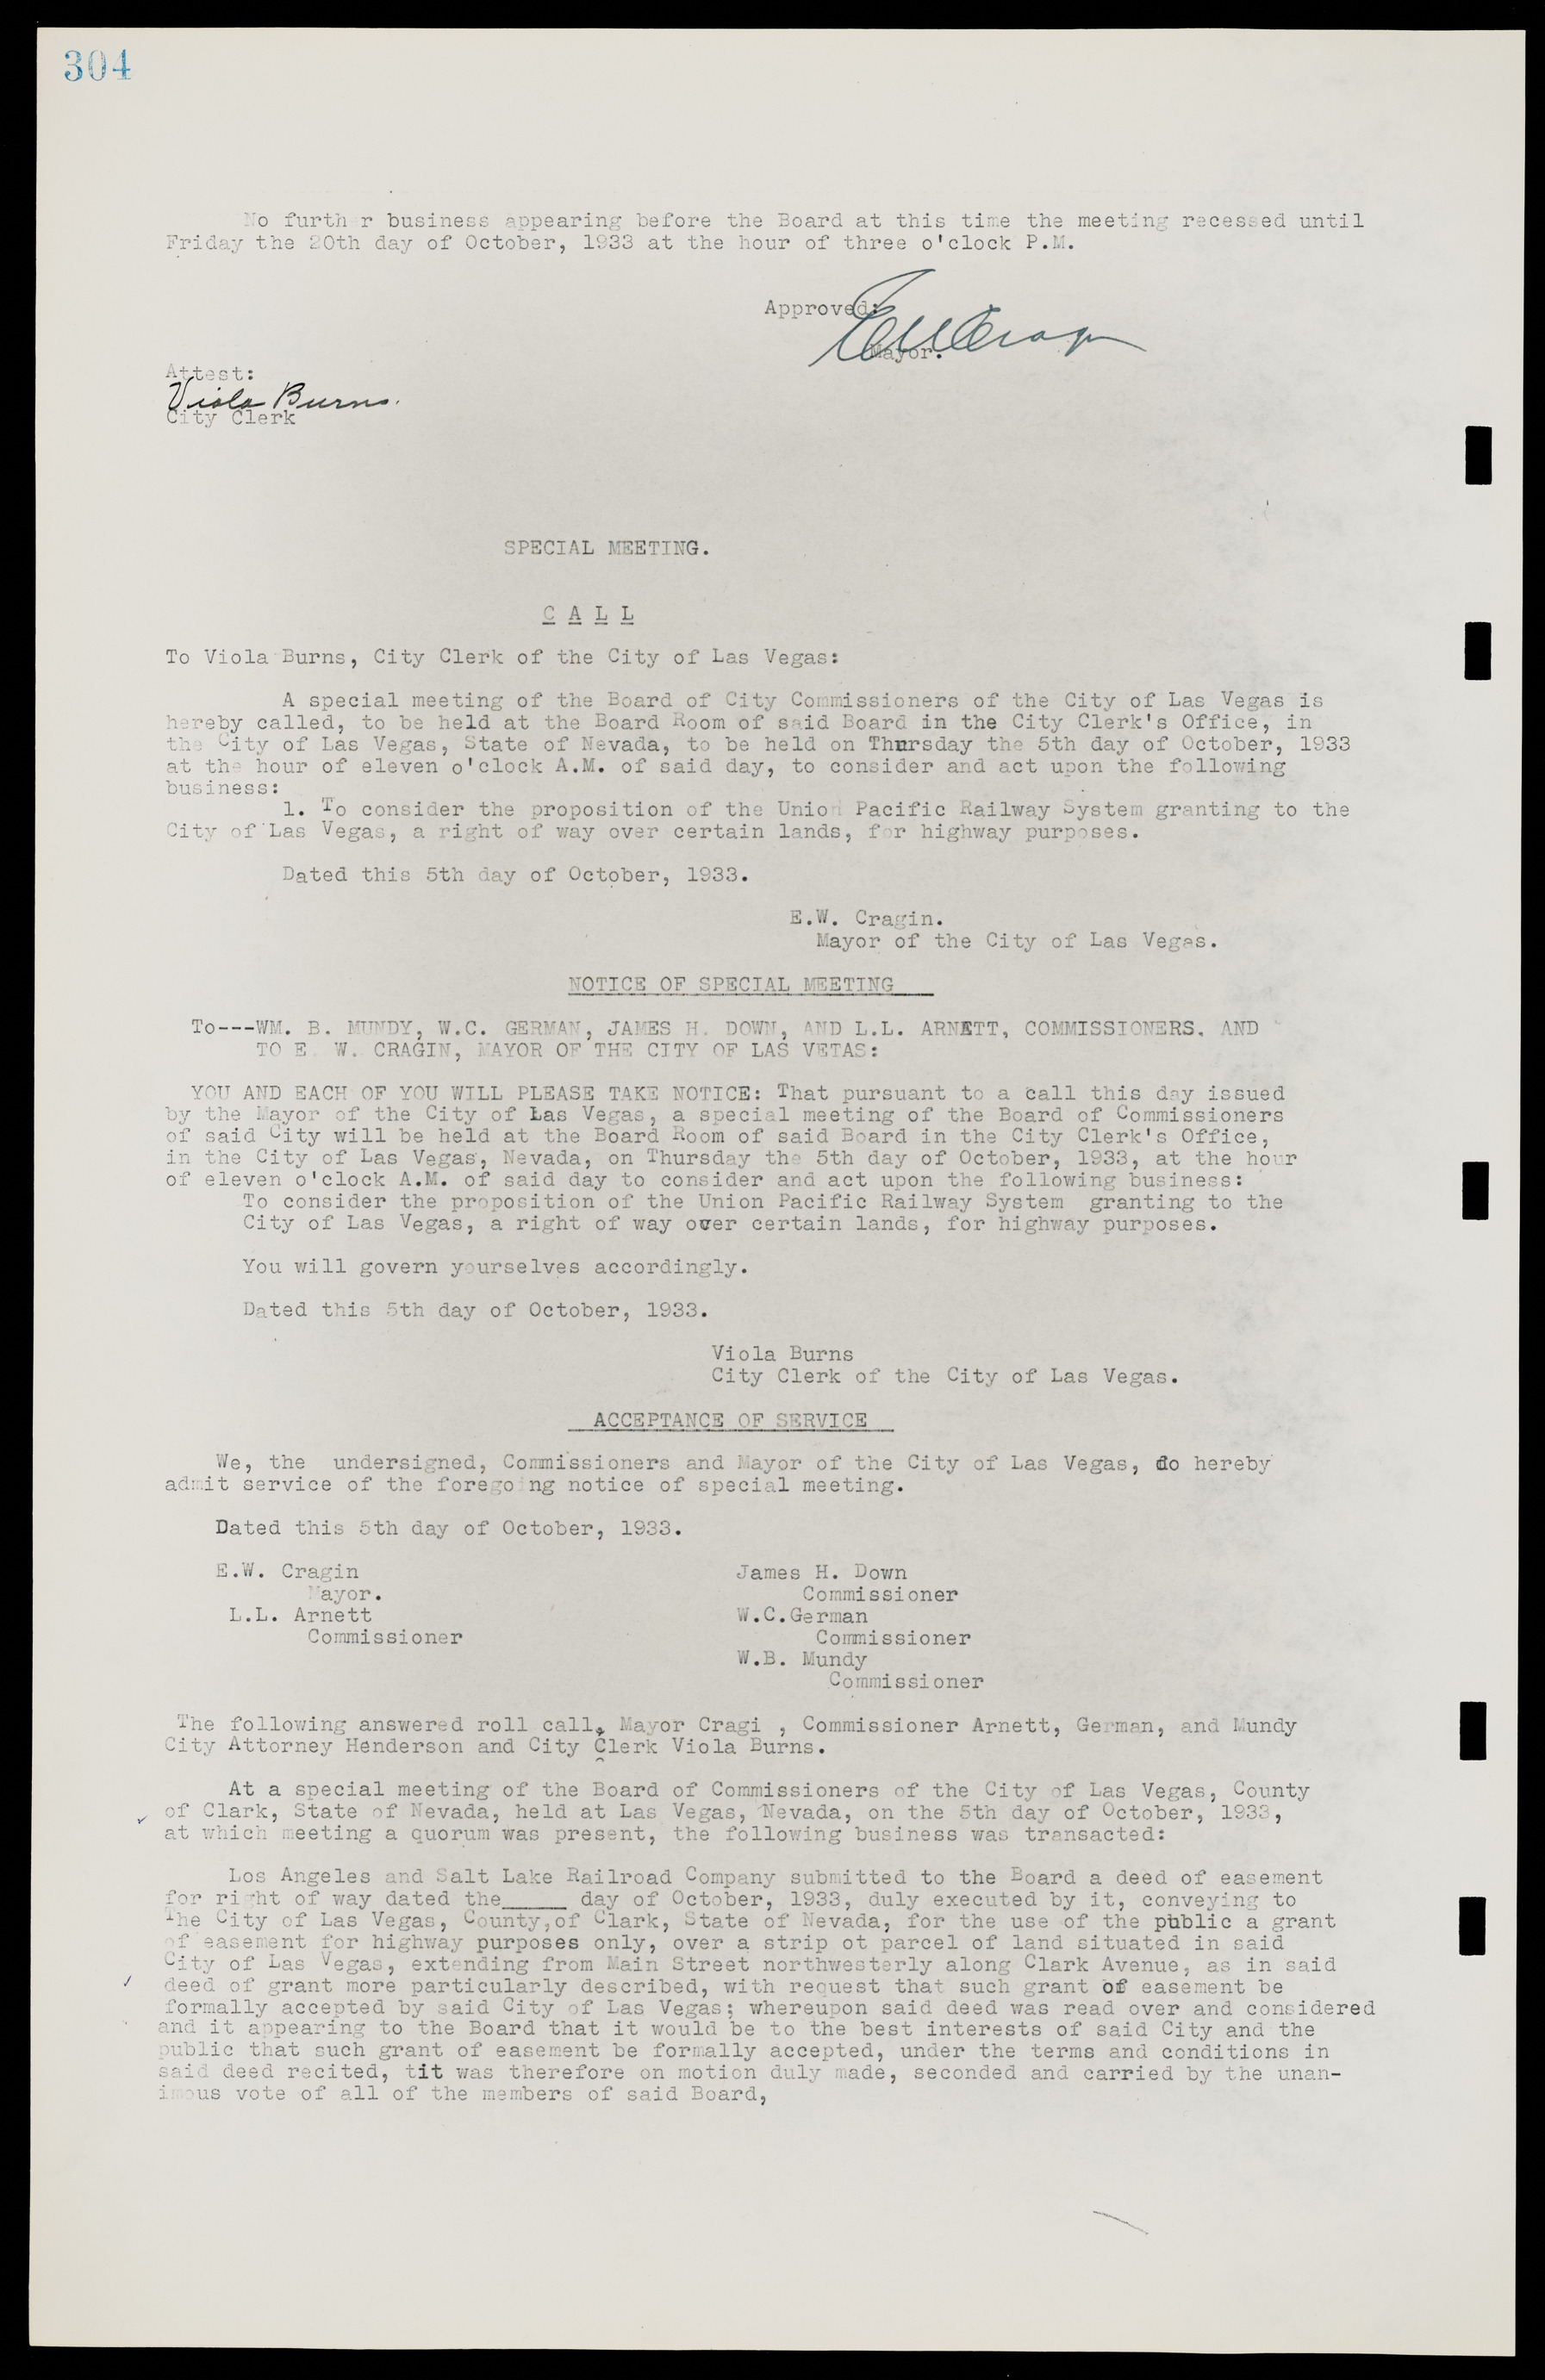 Las Vegas City Commission Minutes, May 14, 1929 to February 11, 1937, lvc000003-311